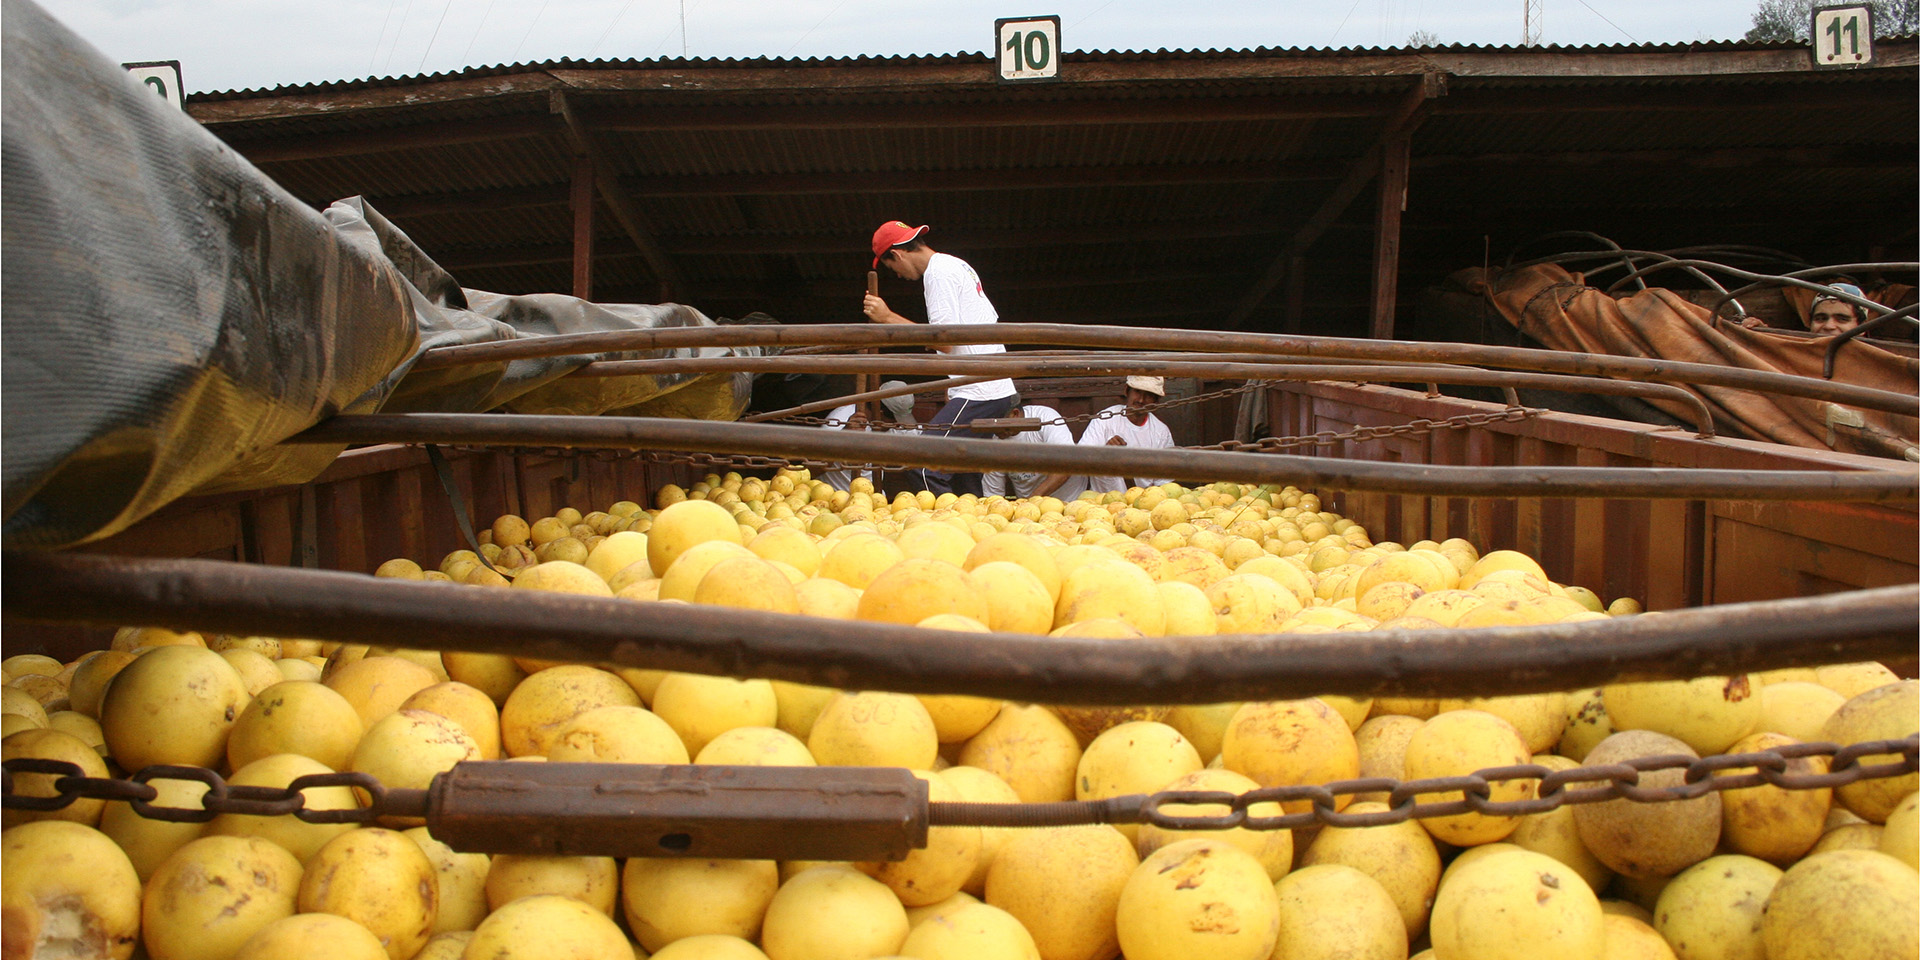 Image of a shipping container filled with grapefruits. Workers can be seen in the background unloading.